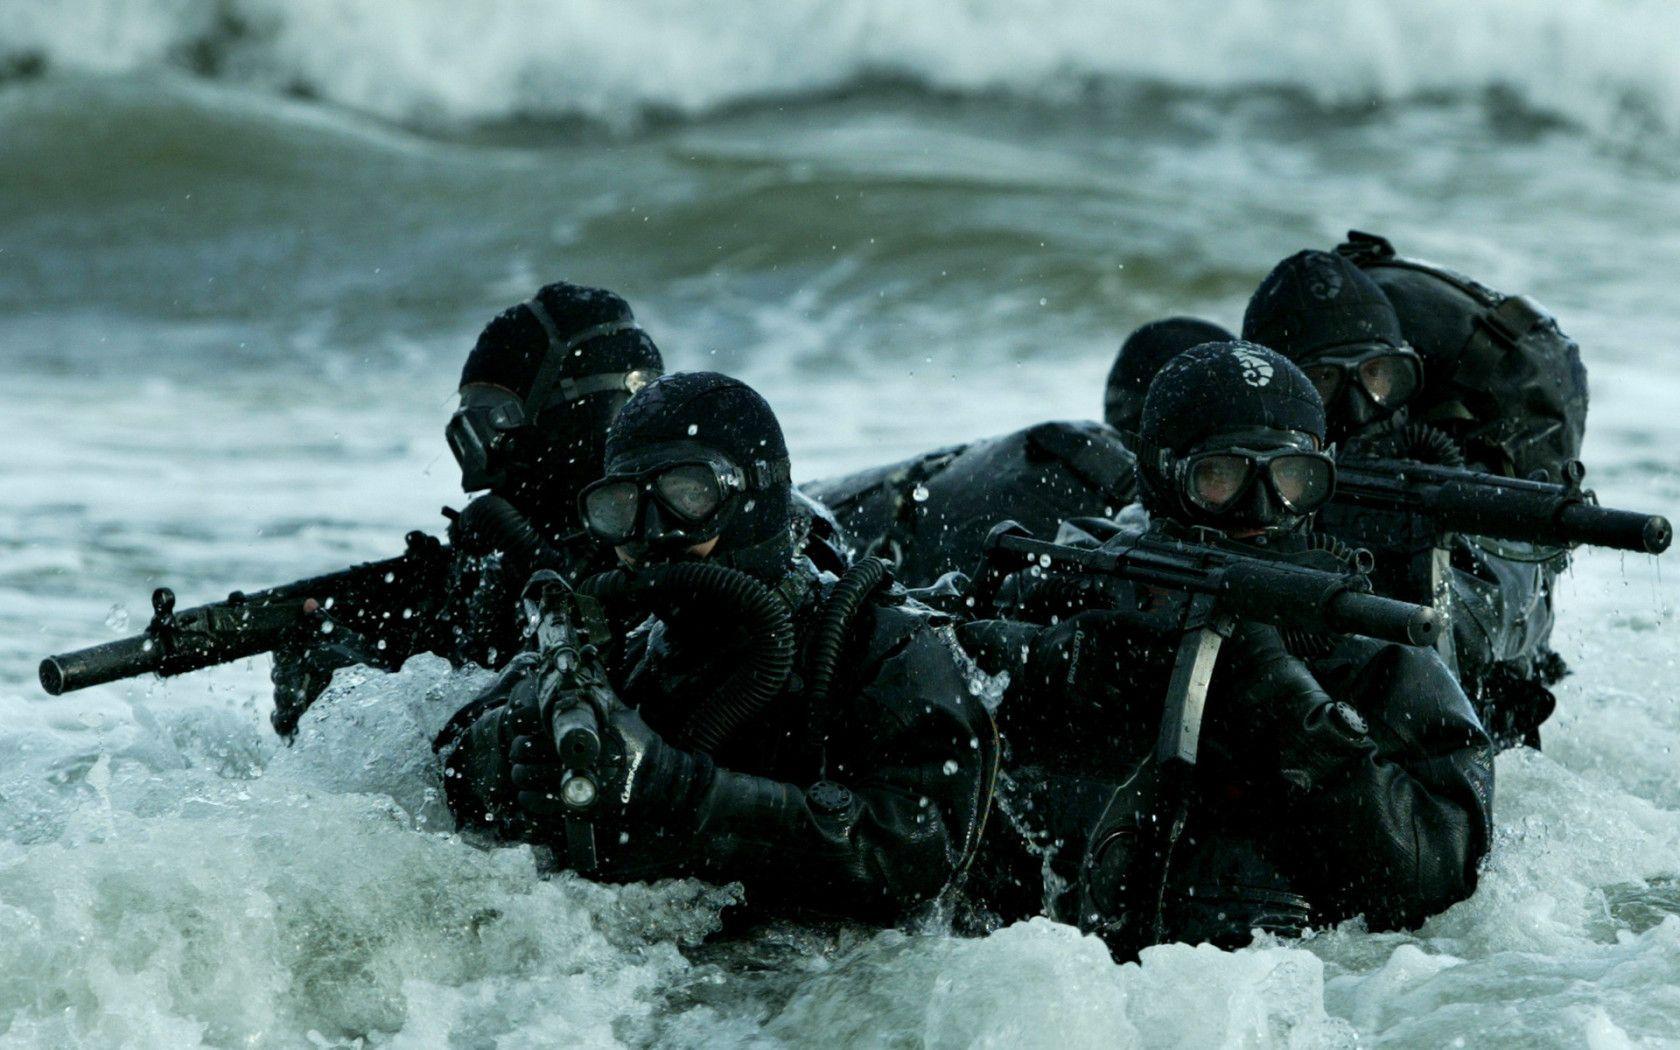 Marines Image for Free (2MTX Marines Wallpaper)